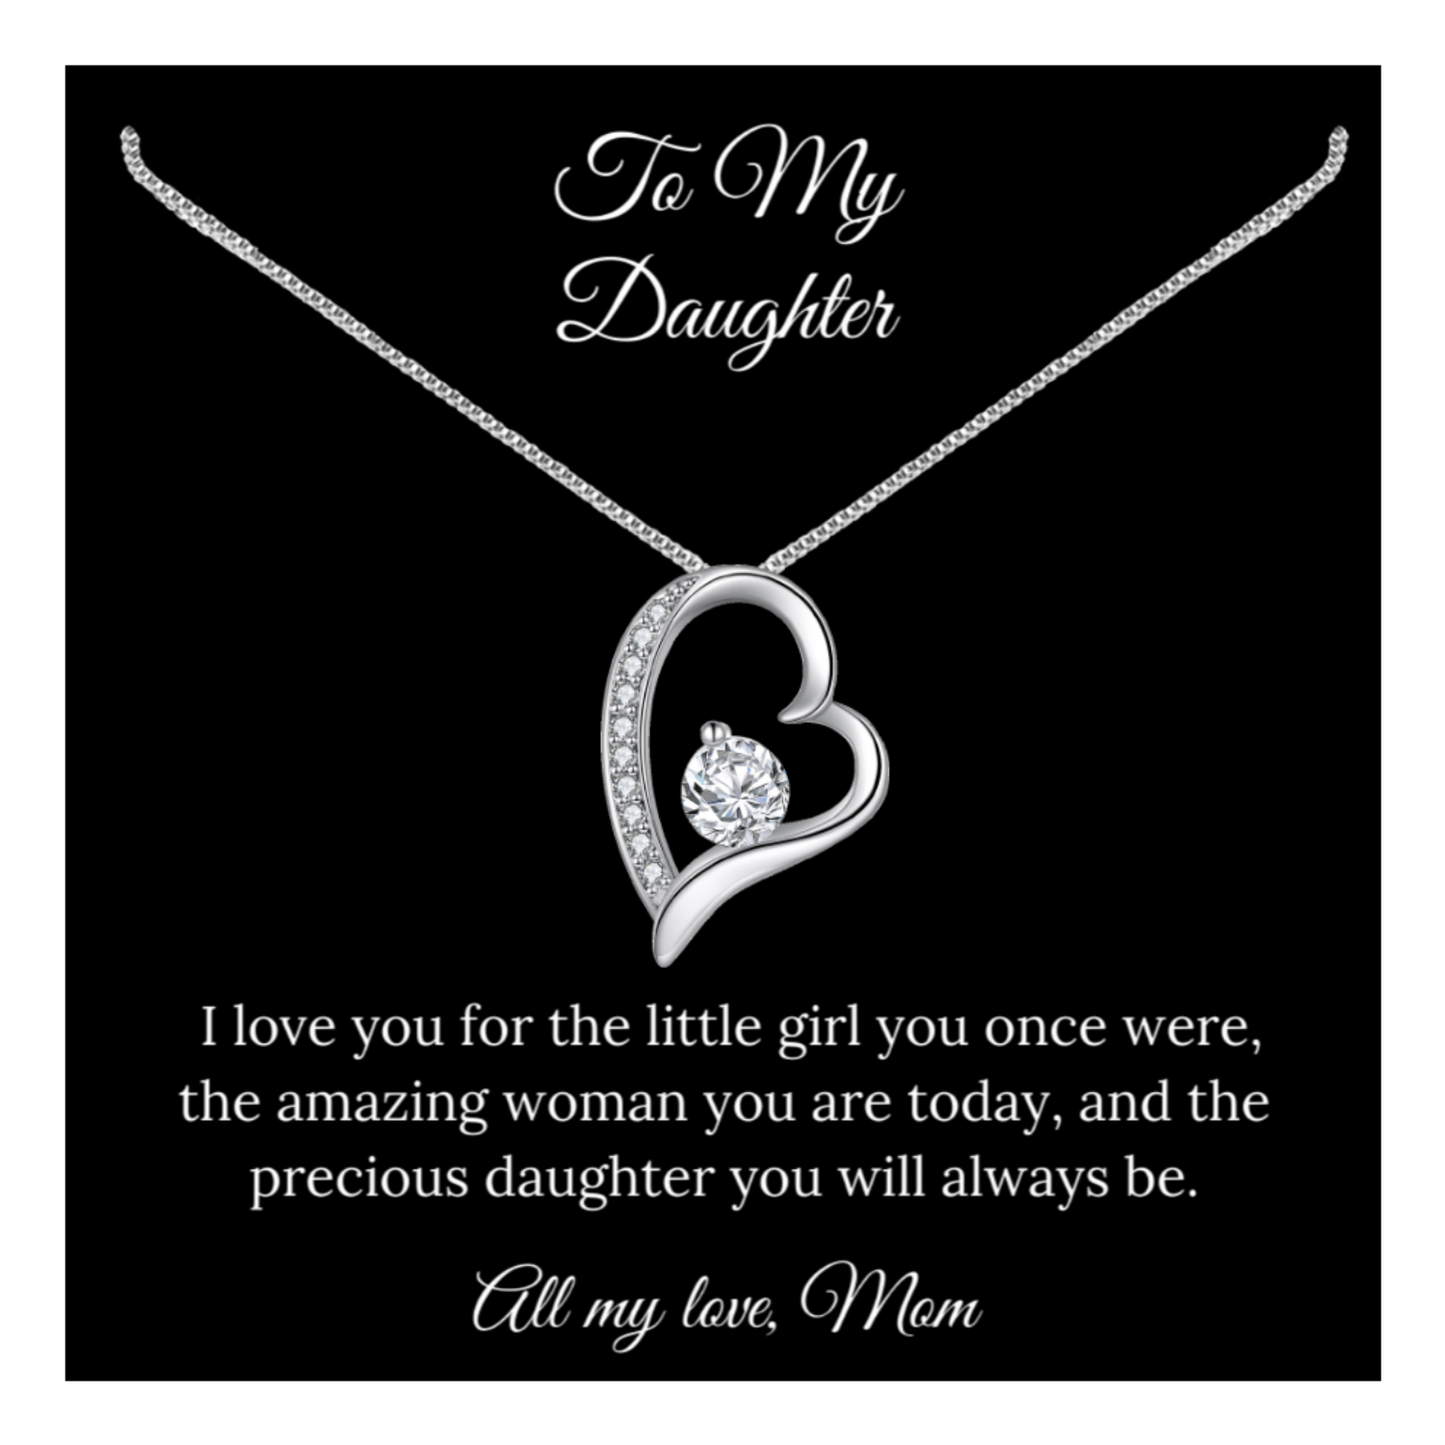 To My Daughter - Heart Necklace, Daughter Necklace, Gift For Daughter, Daughter Necklace, Daughter Gift From Mom - Mardonyx Jewelry